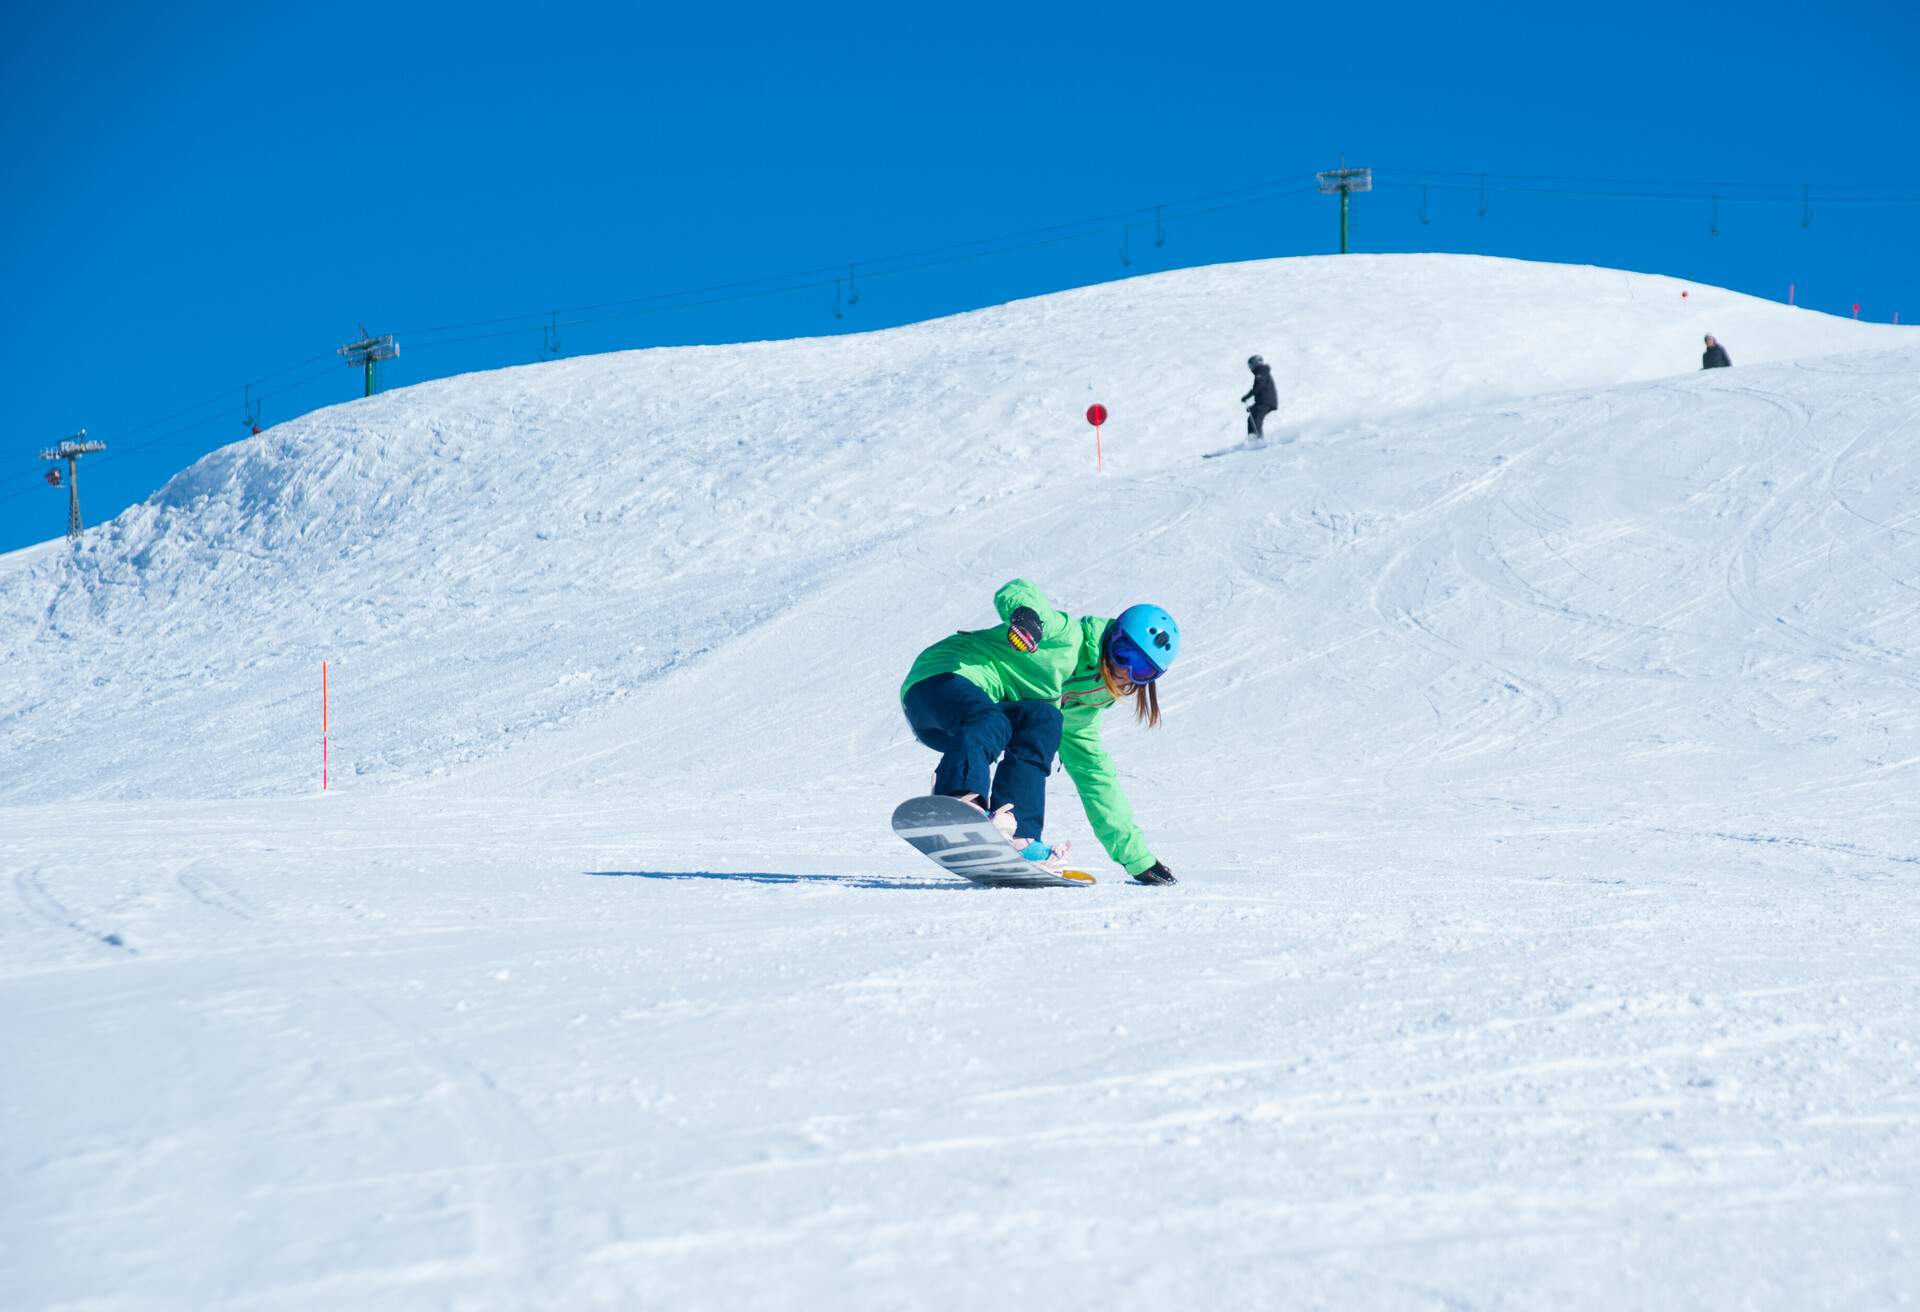 A snowboarder in a green winter jacket and ski helmet is snowboarding down a sloppy snowfield of a mountain.